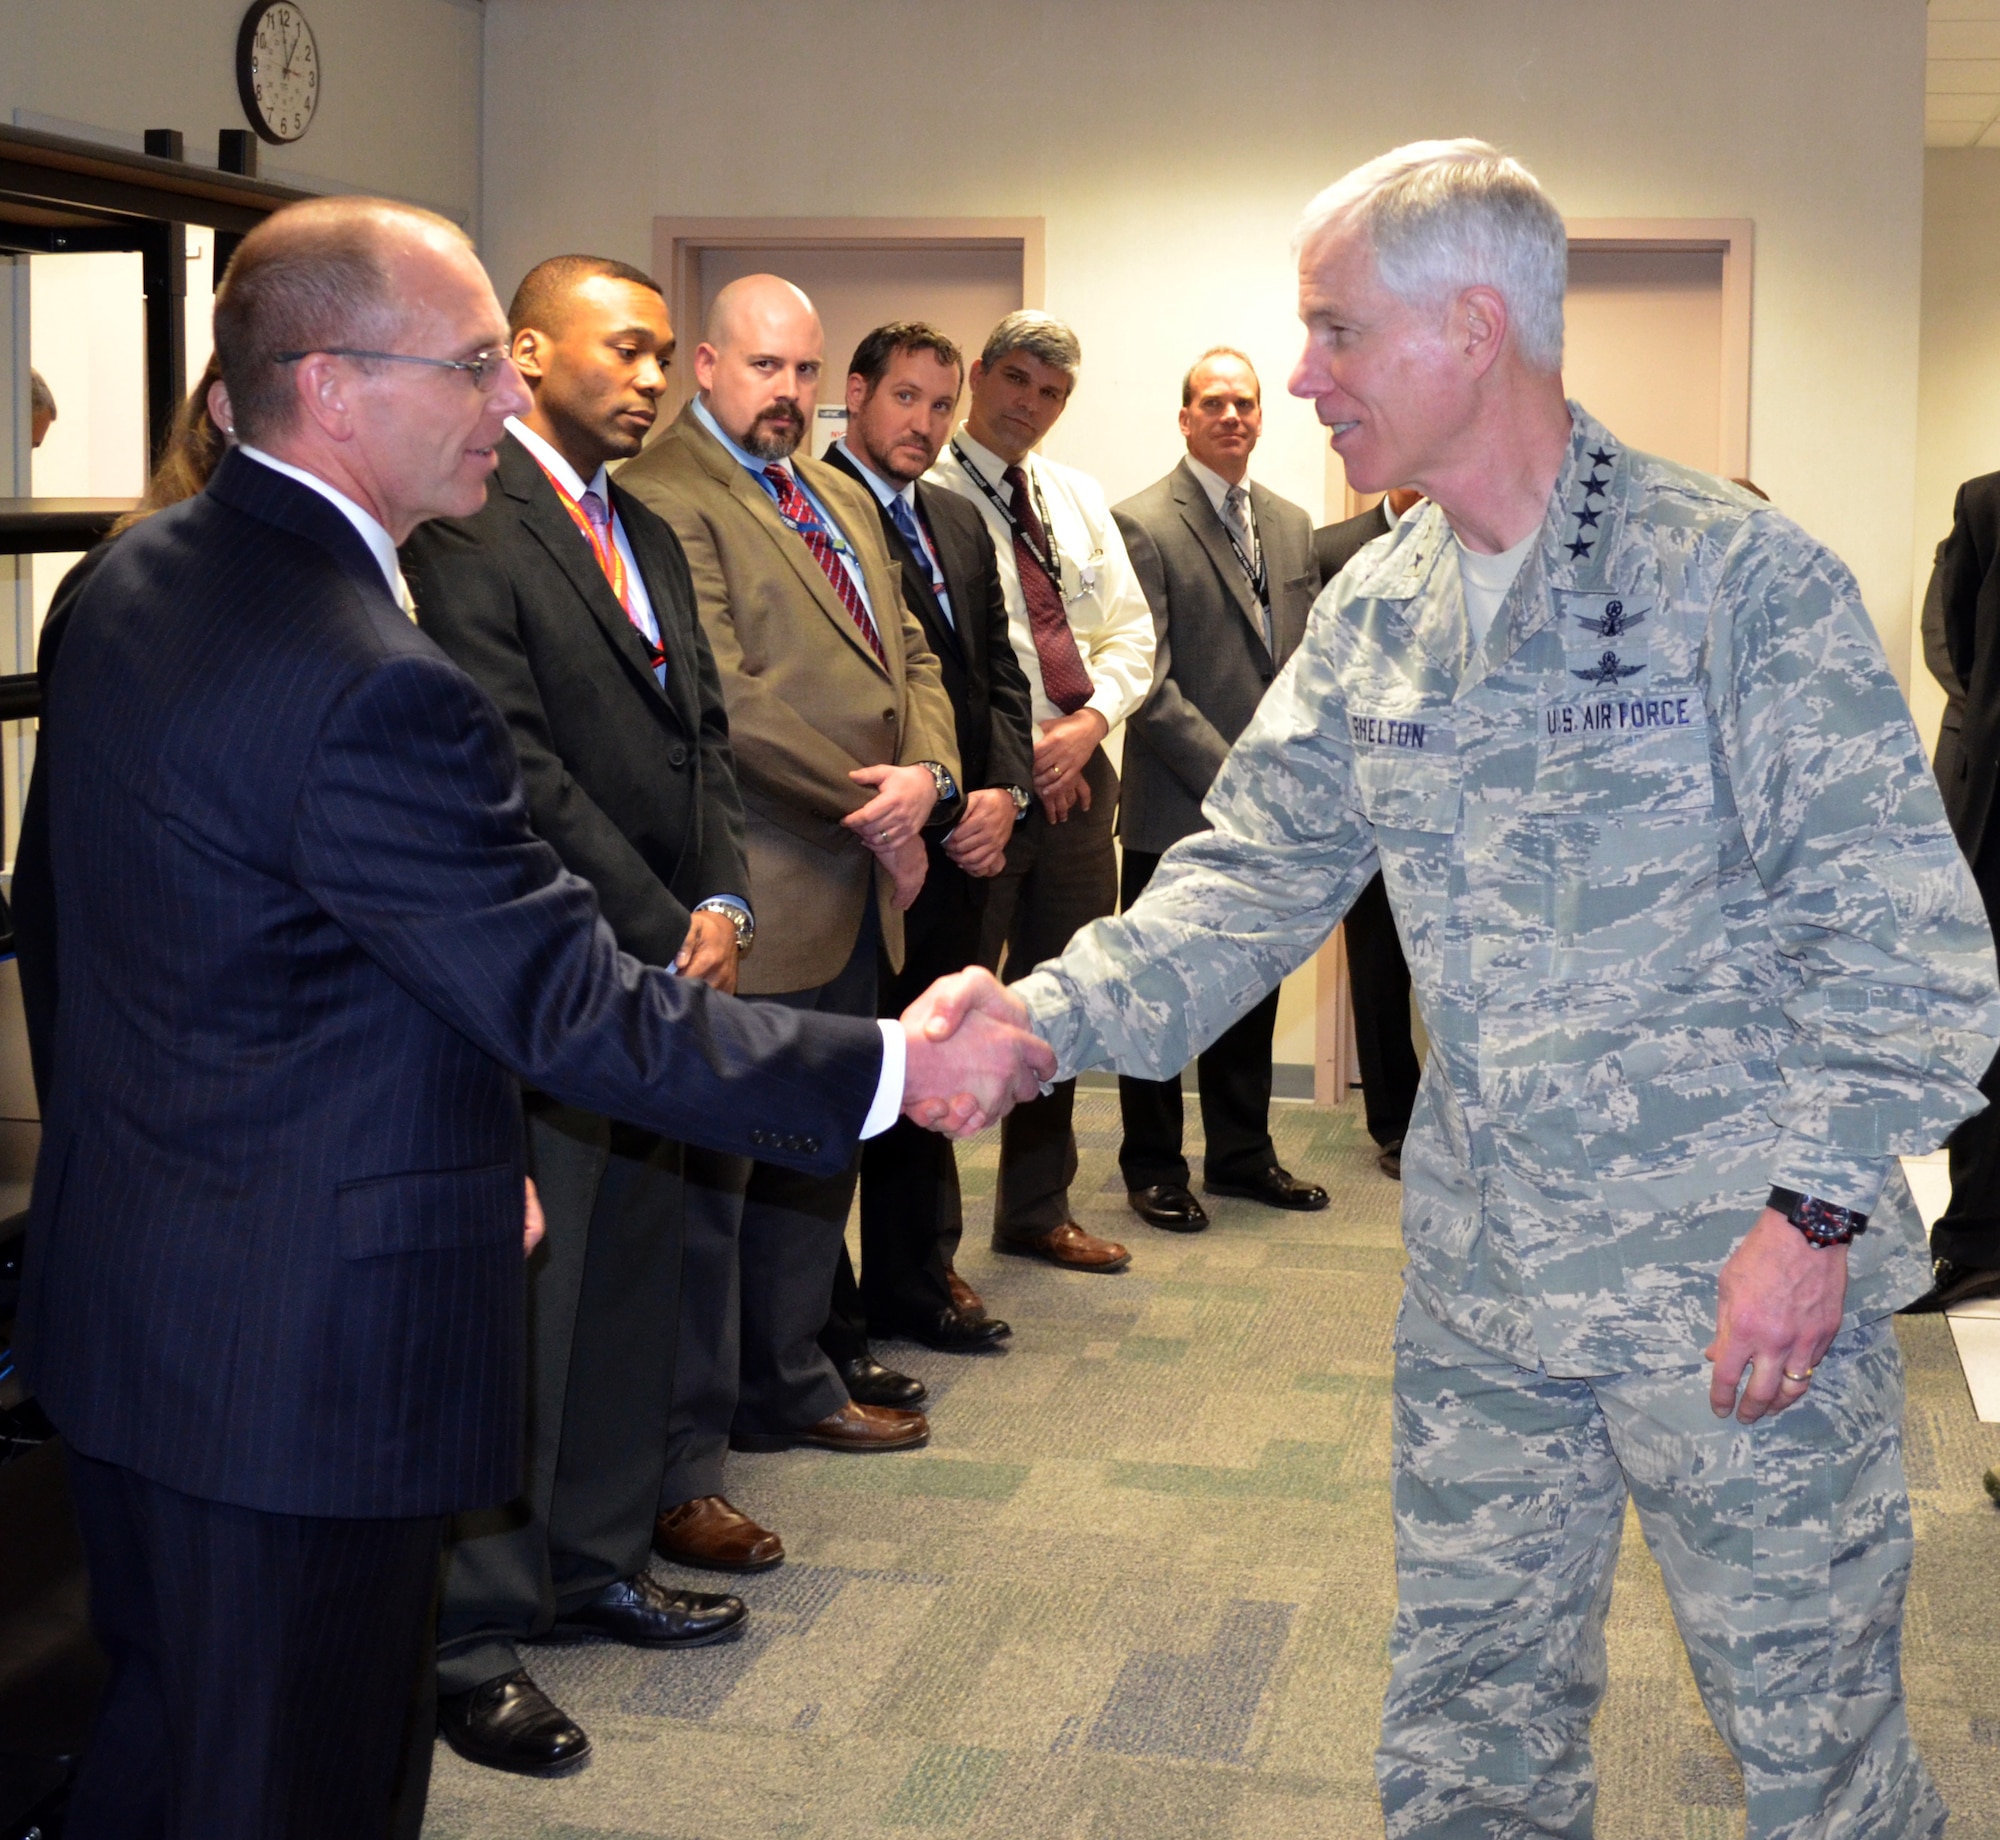 General William L. Shelton meets members of the Air Force Network Integration Center AFNET Migration project management team March 31, 2014, during his visit at Scott Air Force Base, Ill. During his visit, Shelton met the people who were integral to migrating user accounts onto the AFNET. Shelton is the Air Force Space Command commander. (U.S. Air Force Photo/Shelly Petruska)